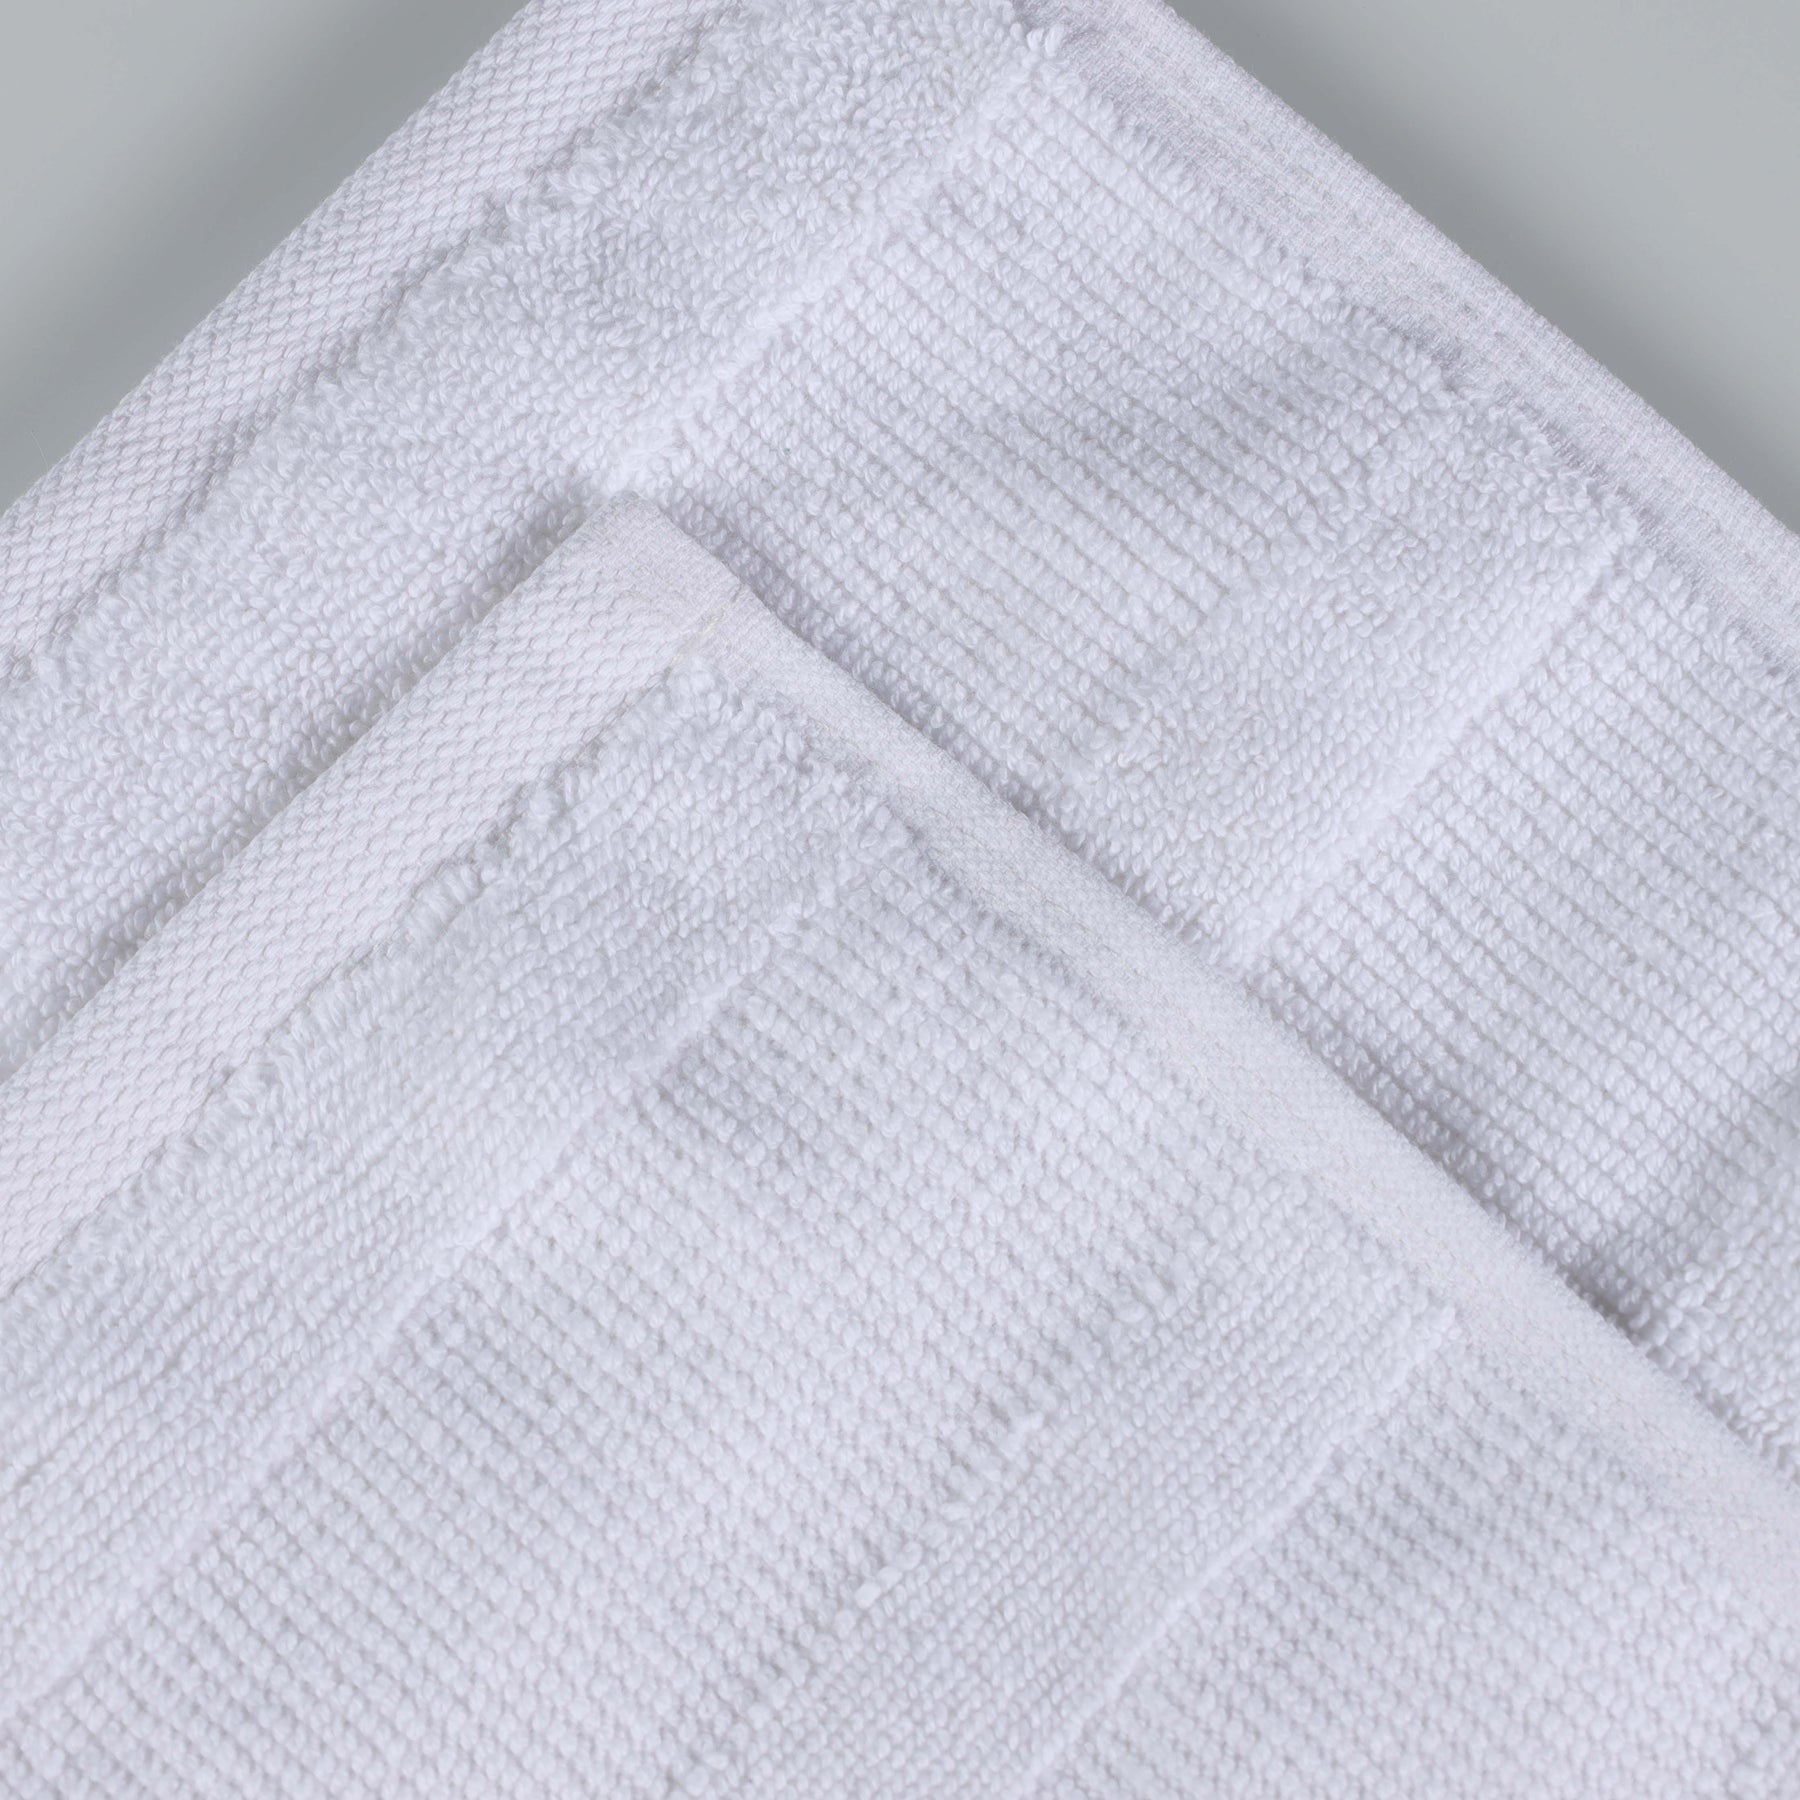 Roma Cotton Ribbed Textured Soft Highly Absorbent Hand Towel - White